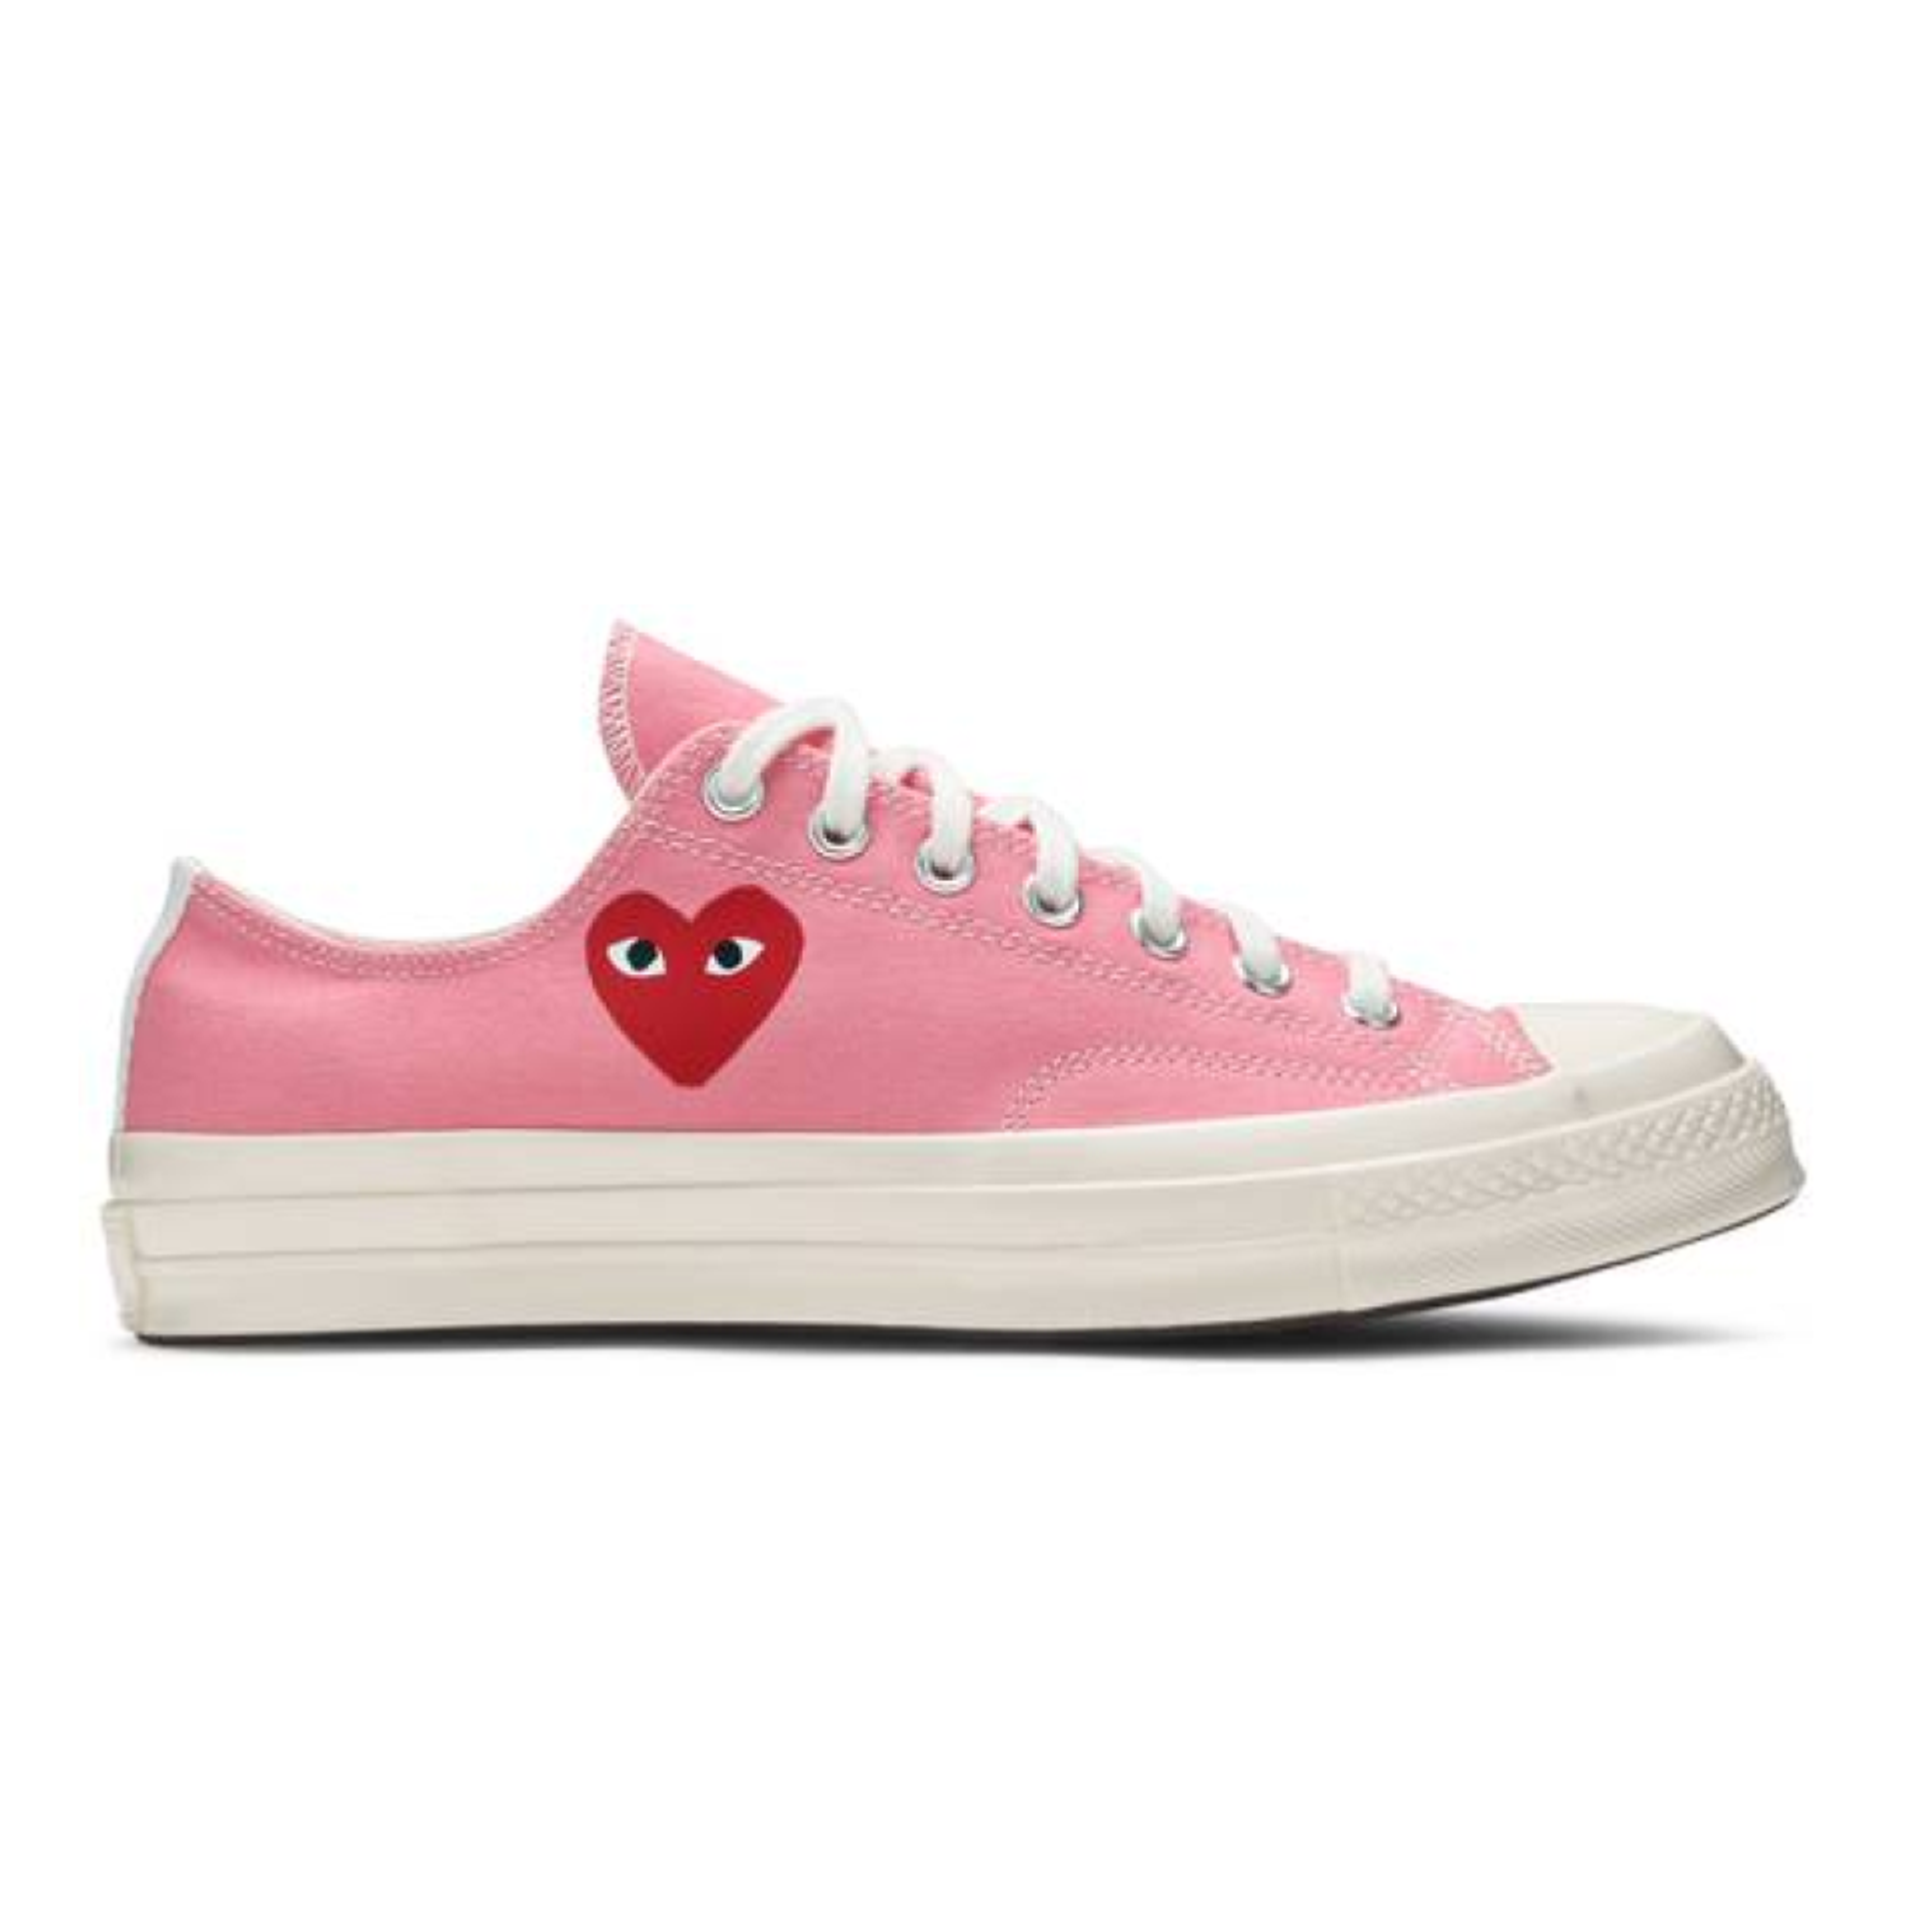 Comme des Garcons PLAY x Chuck 70 Low 'Bright Pink'